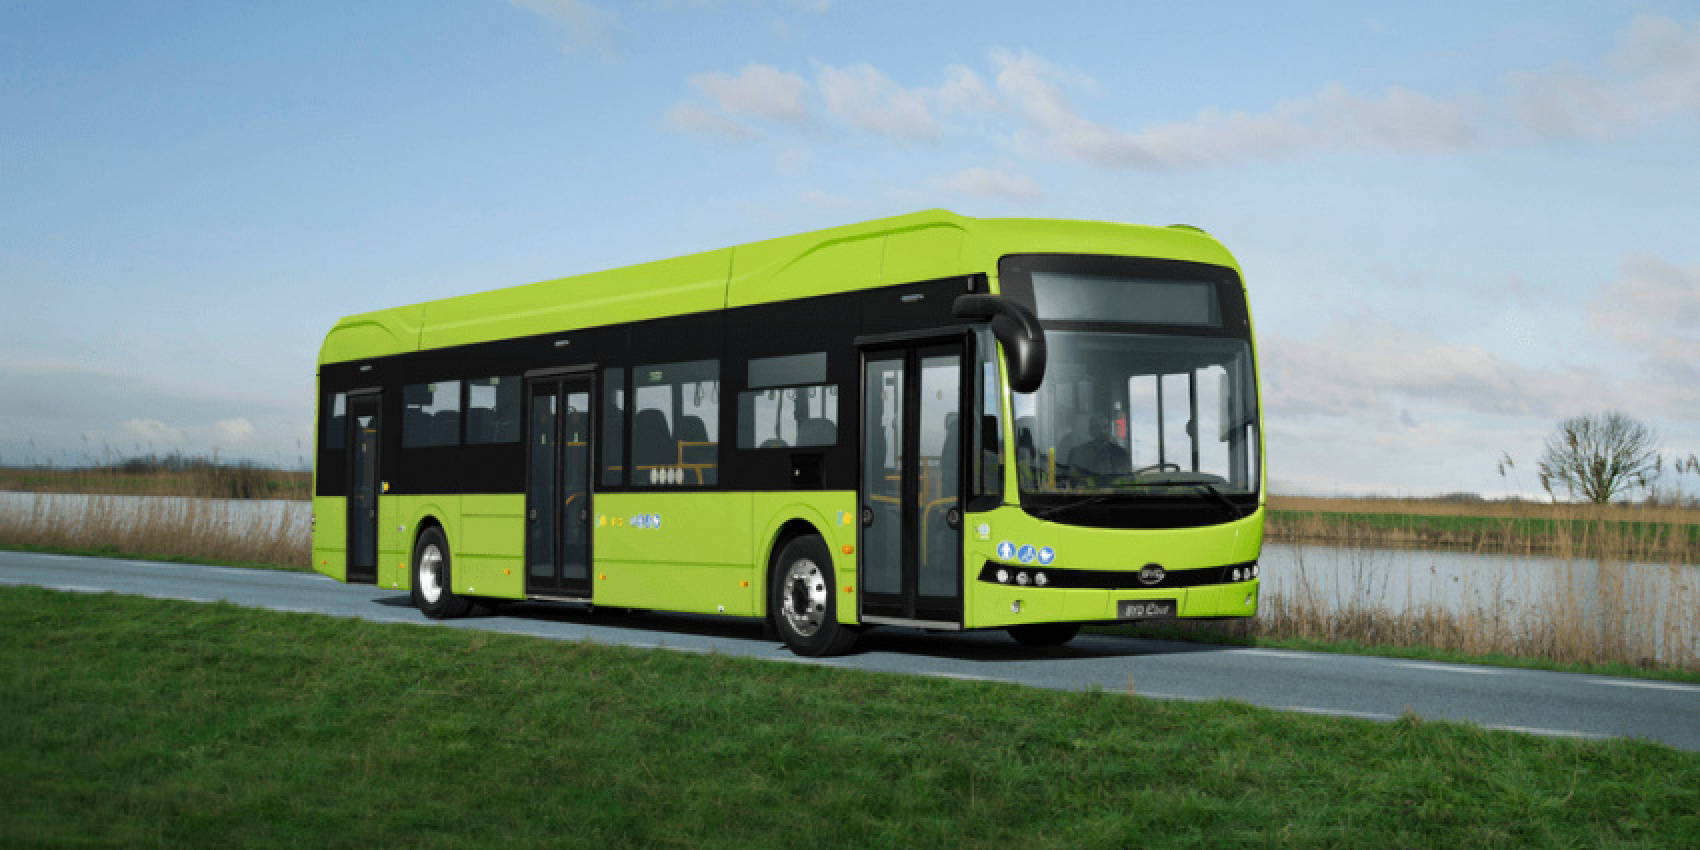 autos, byd, cars, electric vehicle, fleets, electric buses, finland, helsinki, nobina, public transport, byd to deliver 30 electric buses for nobina